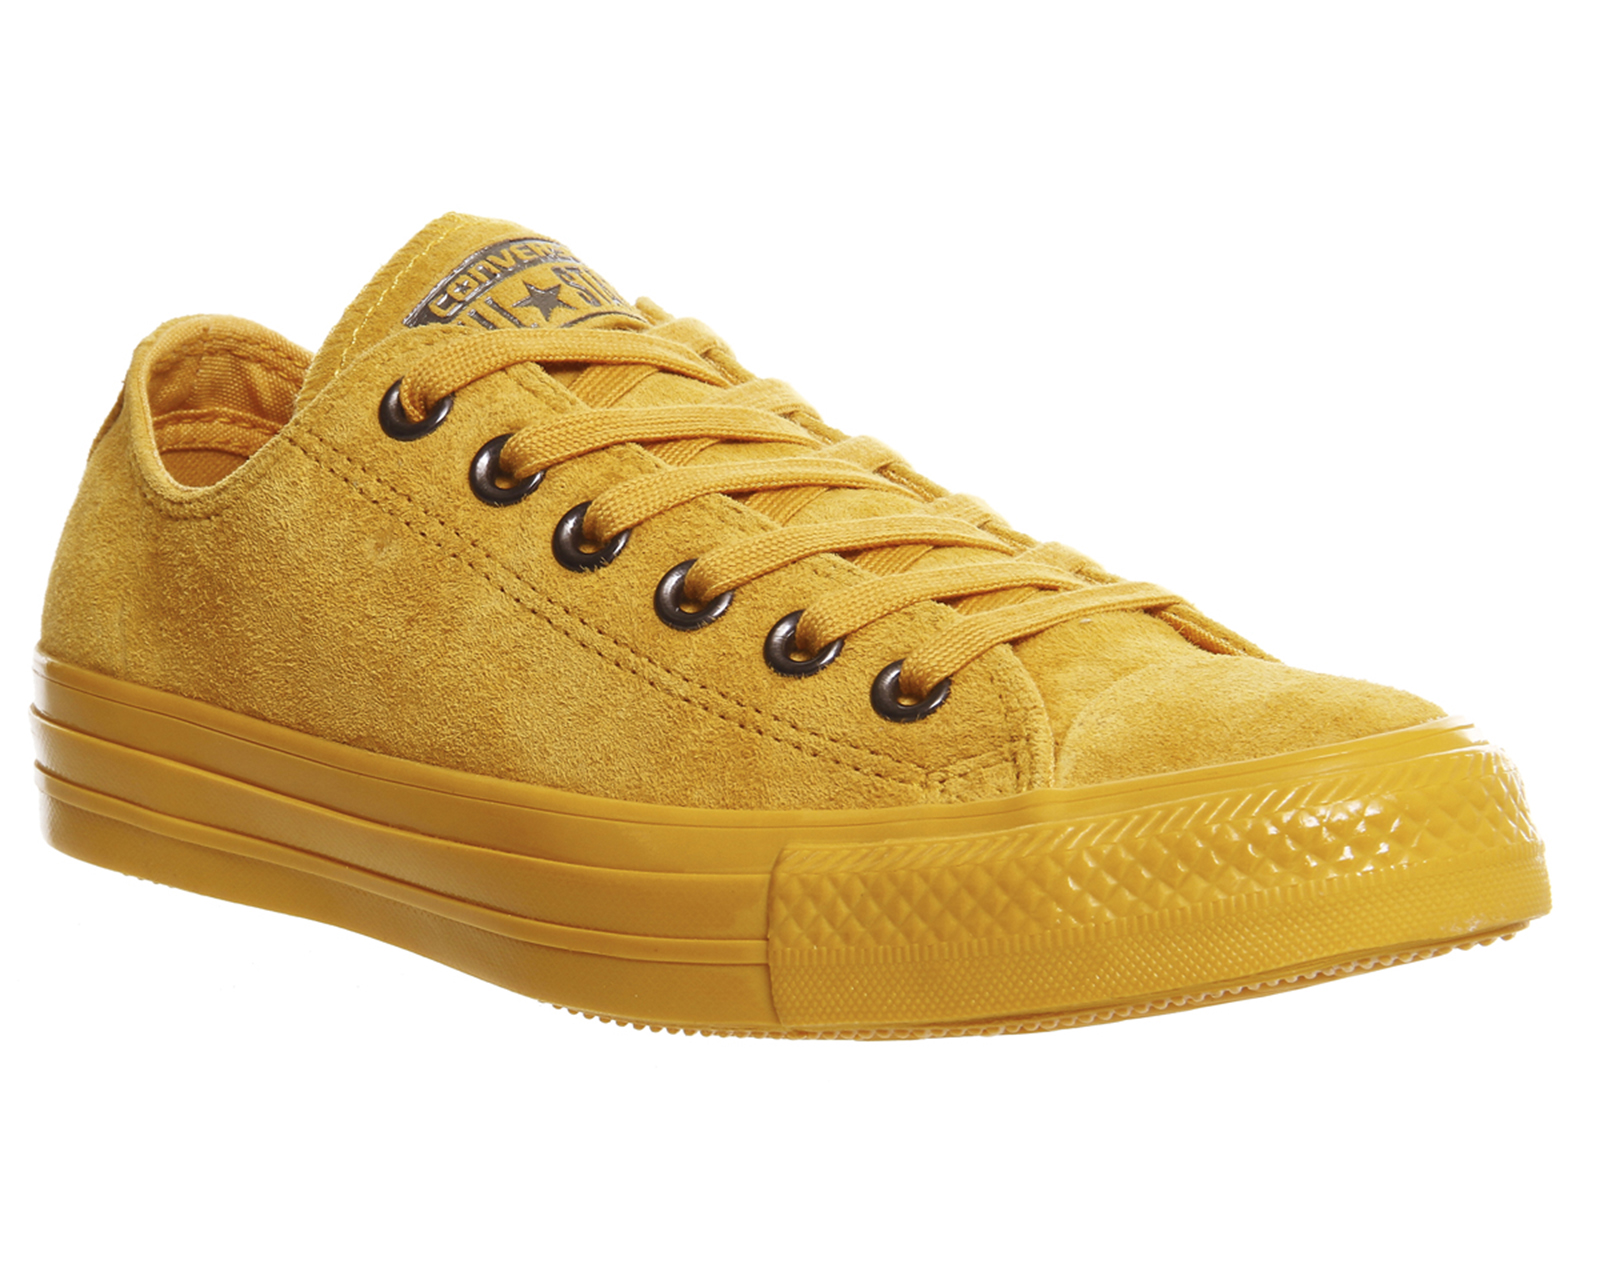 yellow leather converse